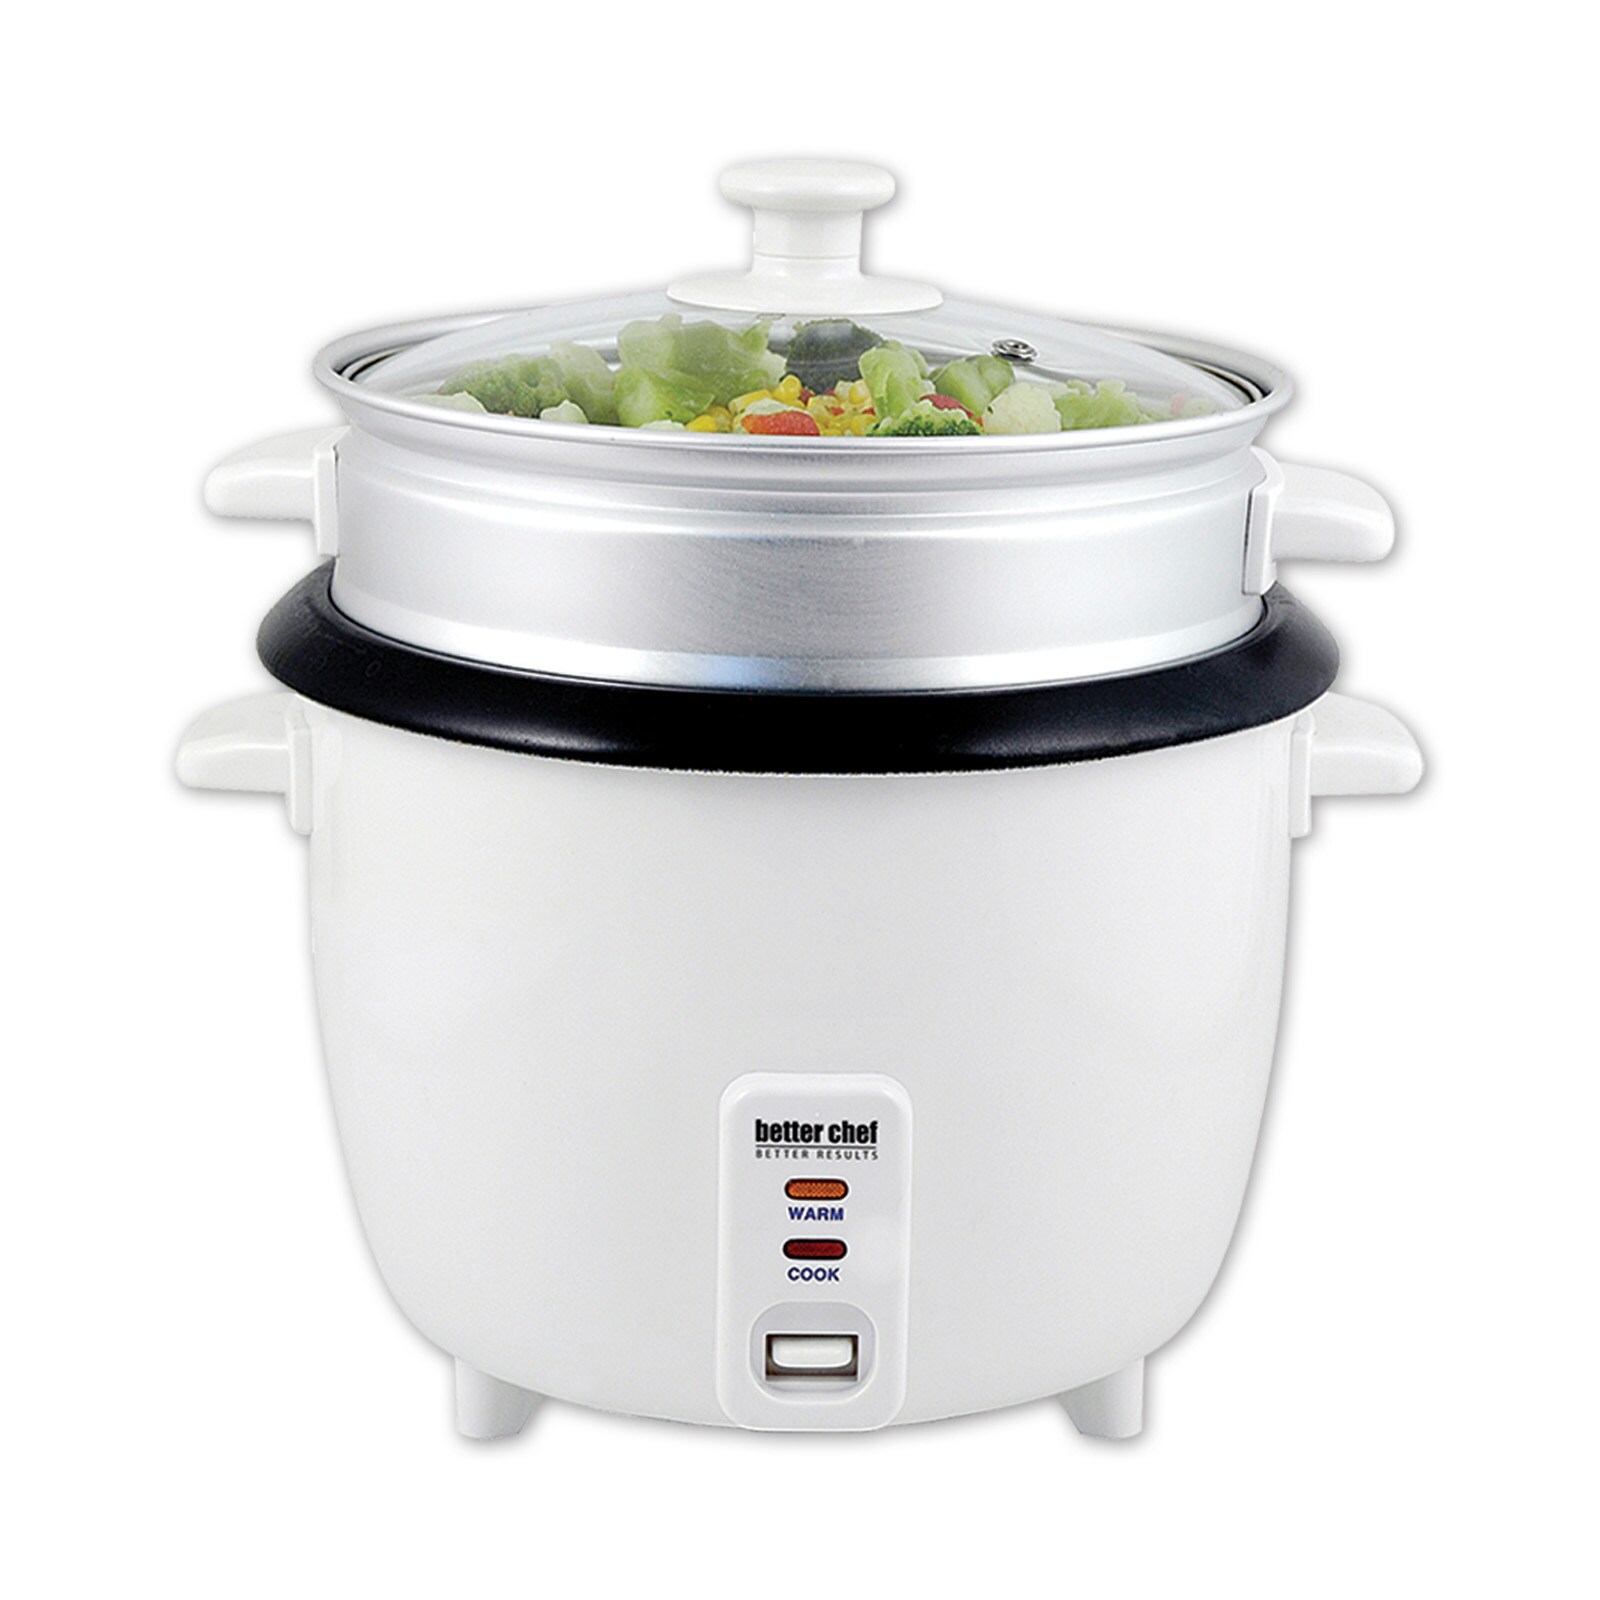 IMUSA UL-Listed 6-Cup Rice Cooker, White Metal Housing